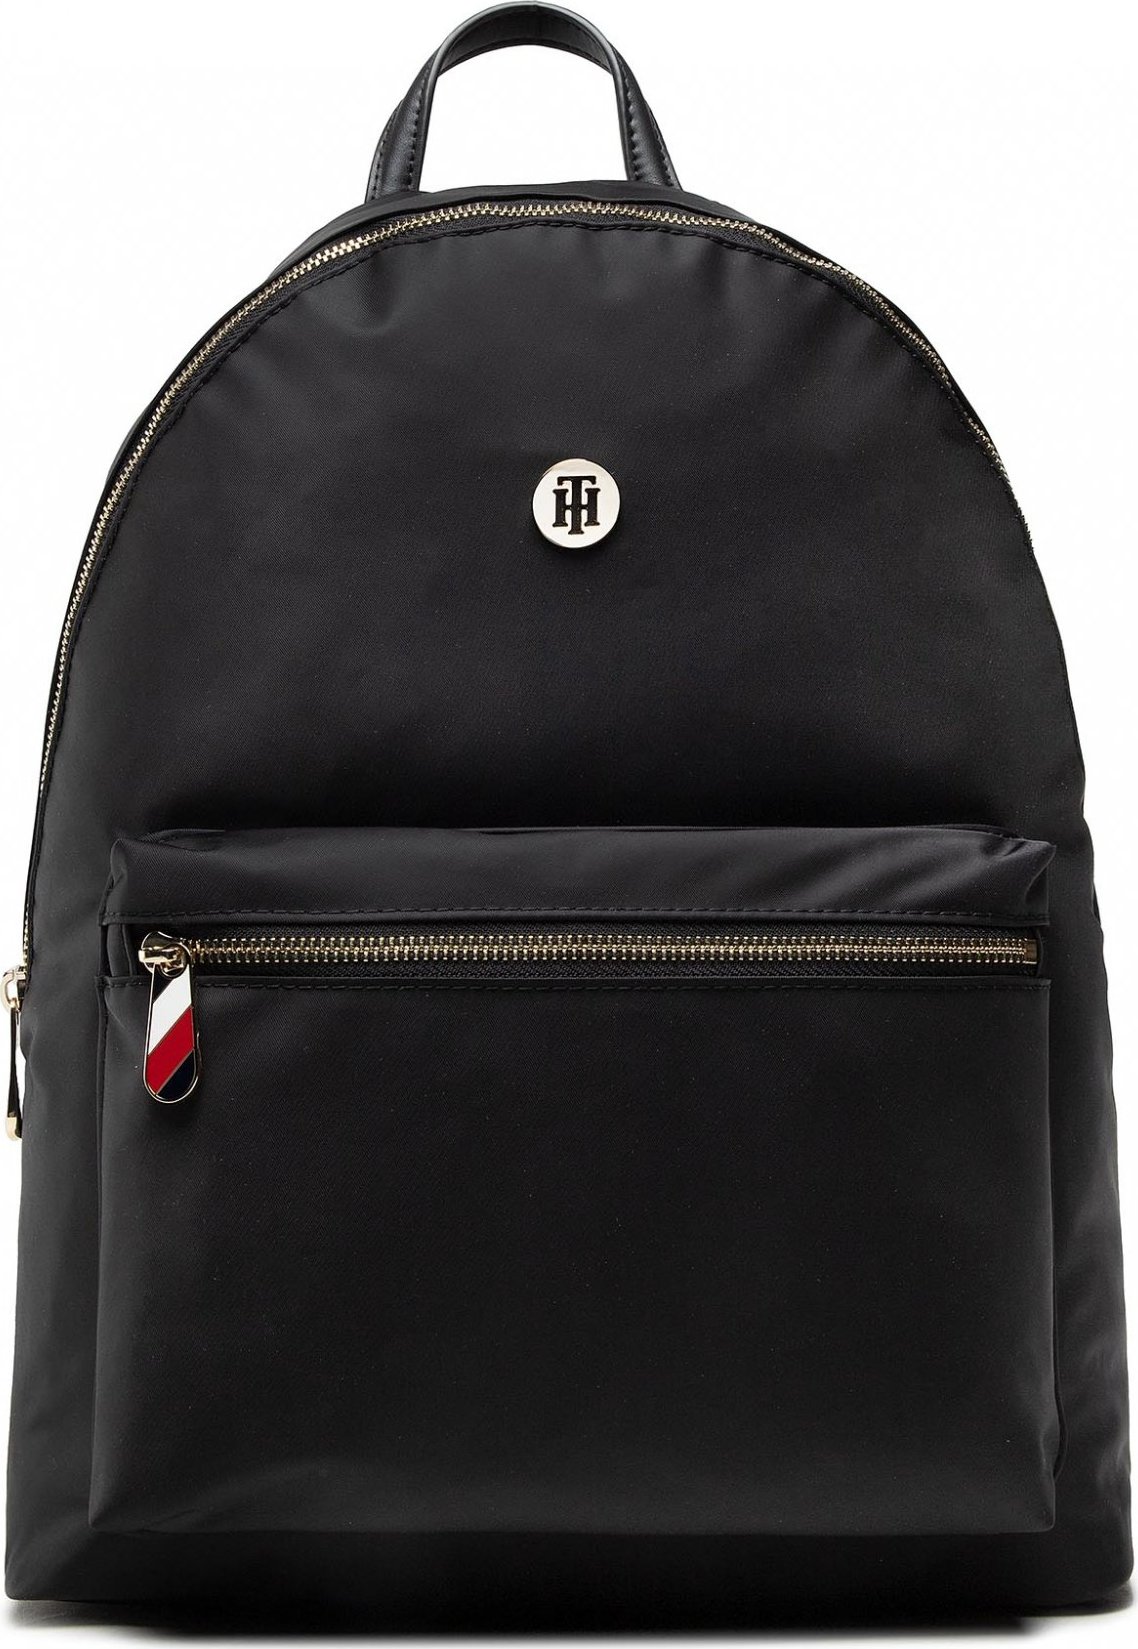 TOMMY HILFIGER Poppy St Backpack AW0AW10264